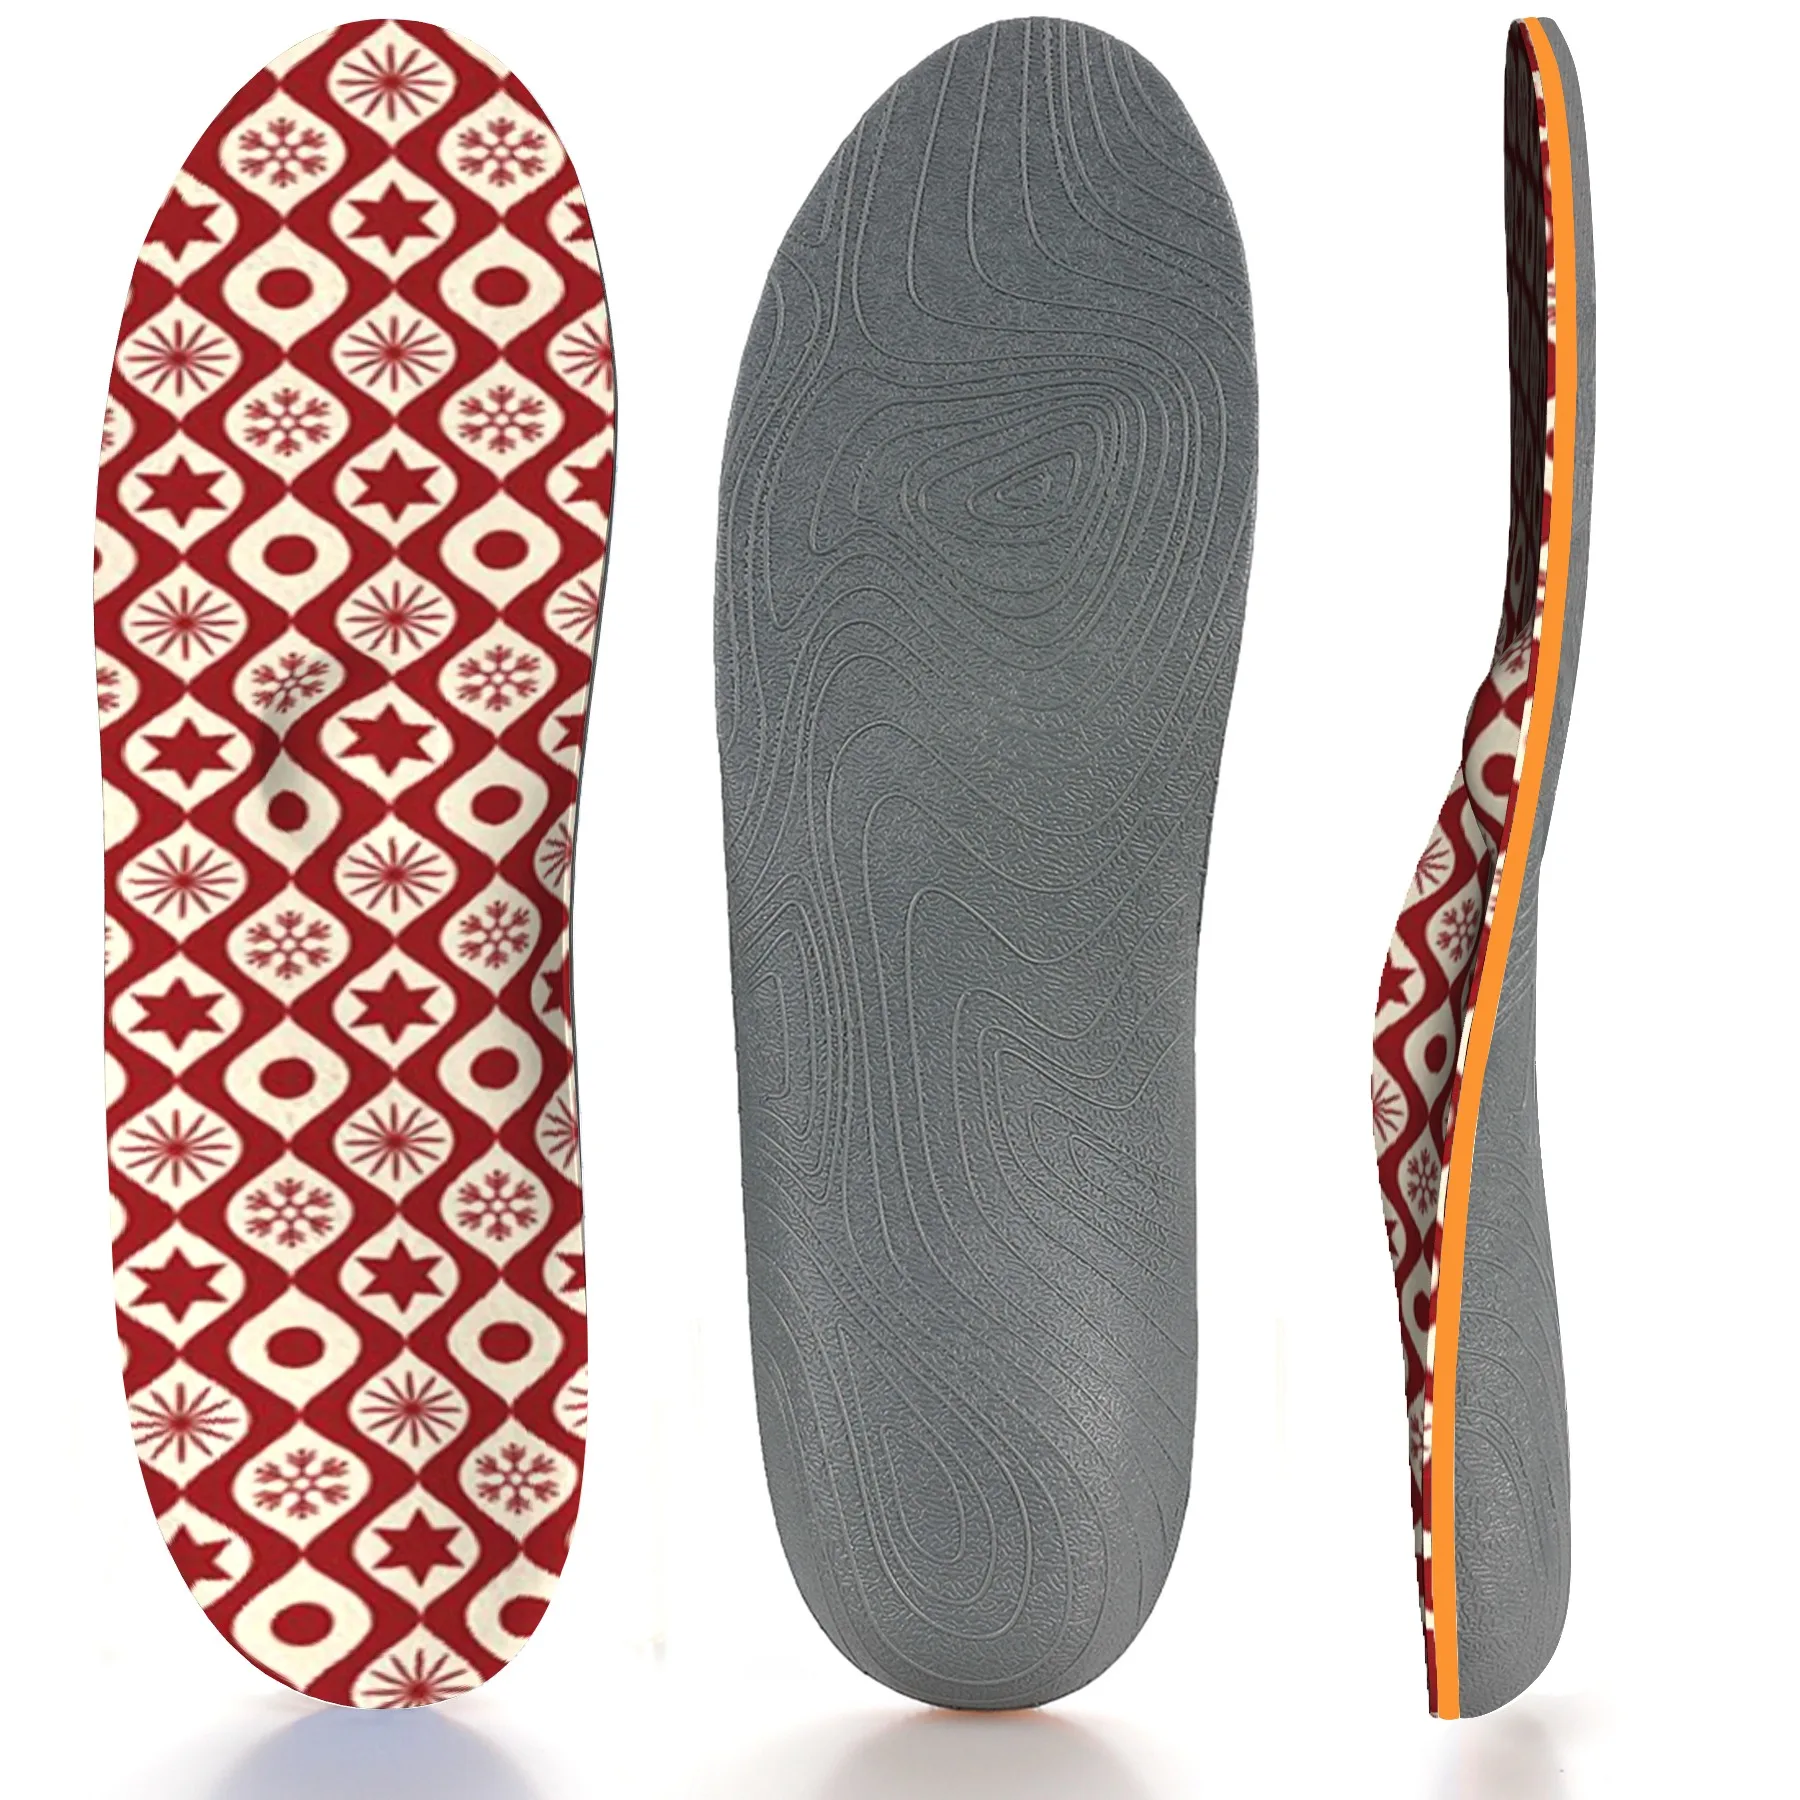 Geometric patterns, insoles, fashionable plantar fasciitis, arch support, orthopedic insoles, flat foot pain